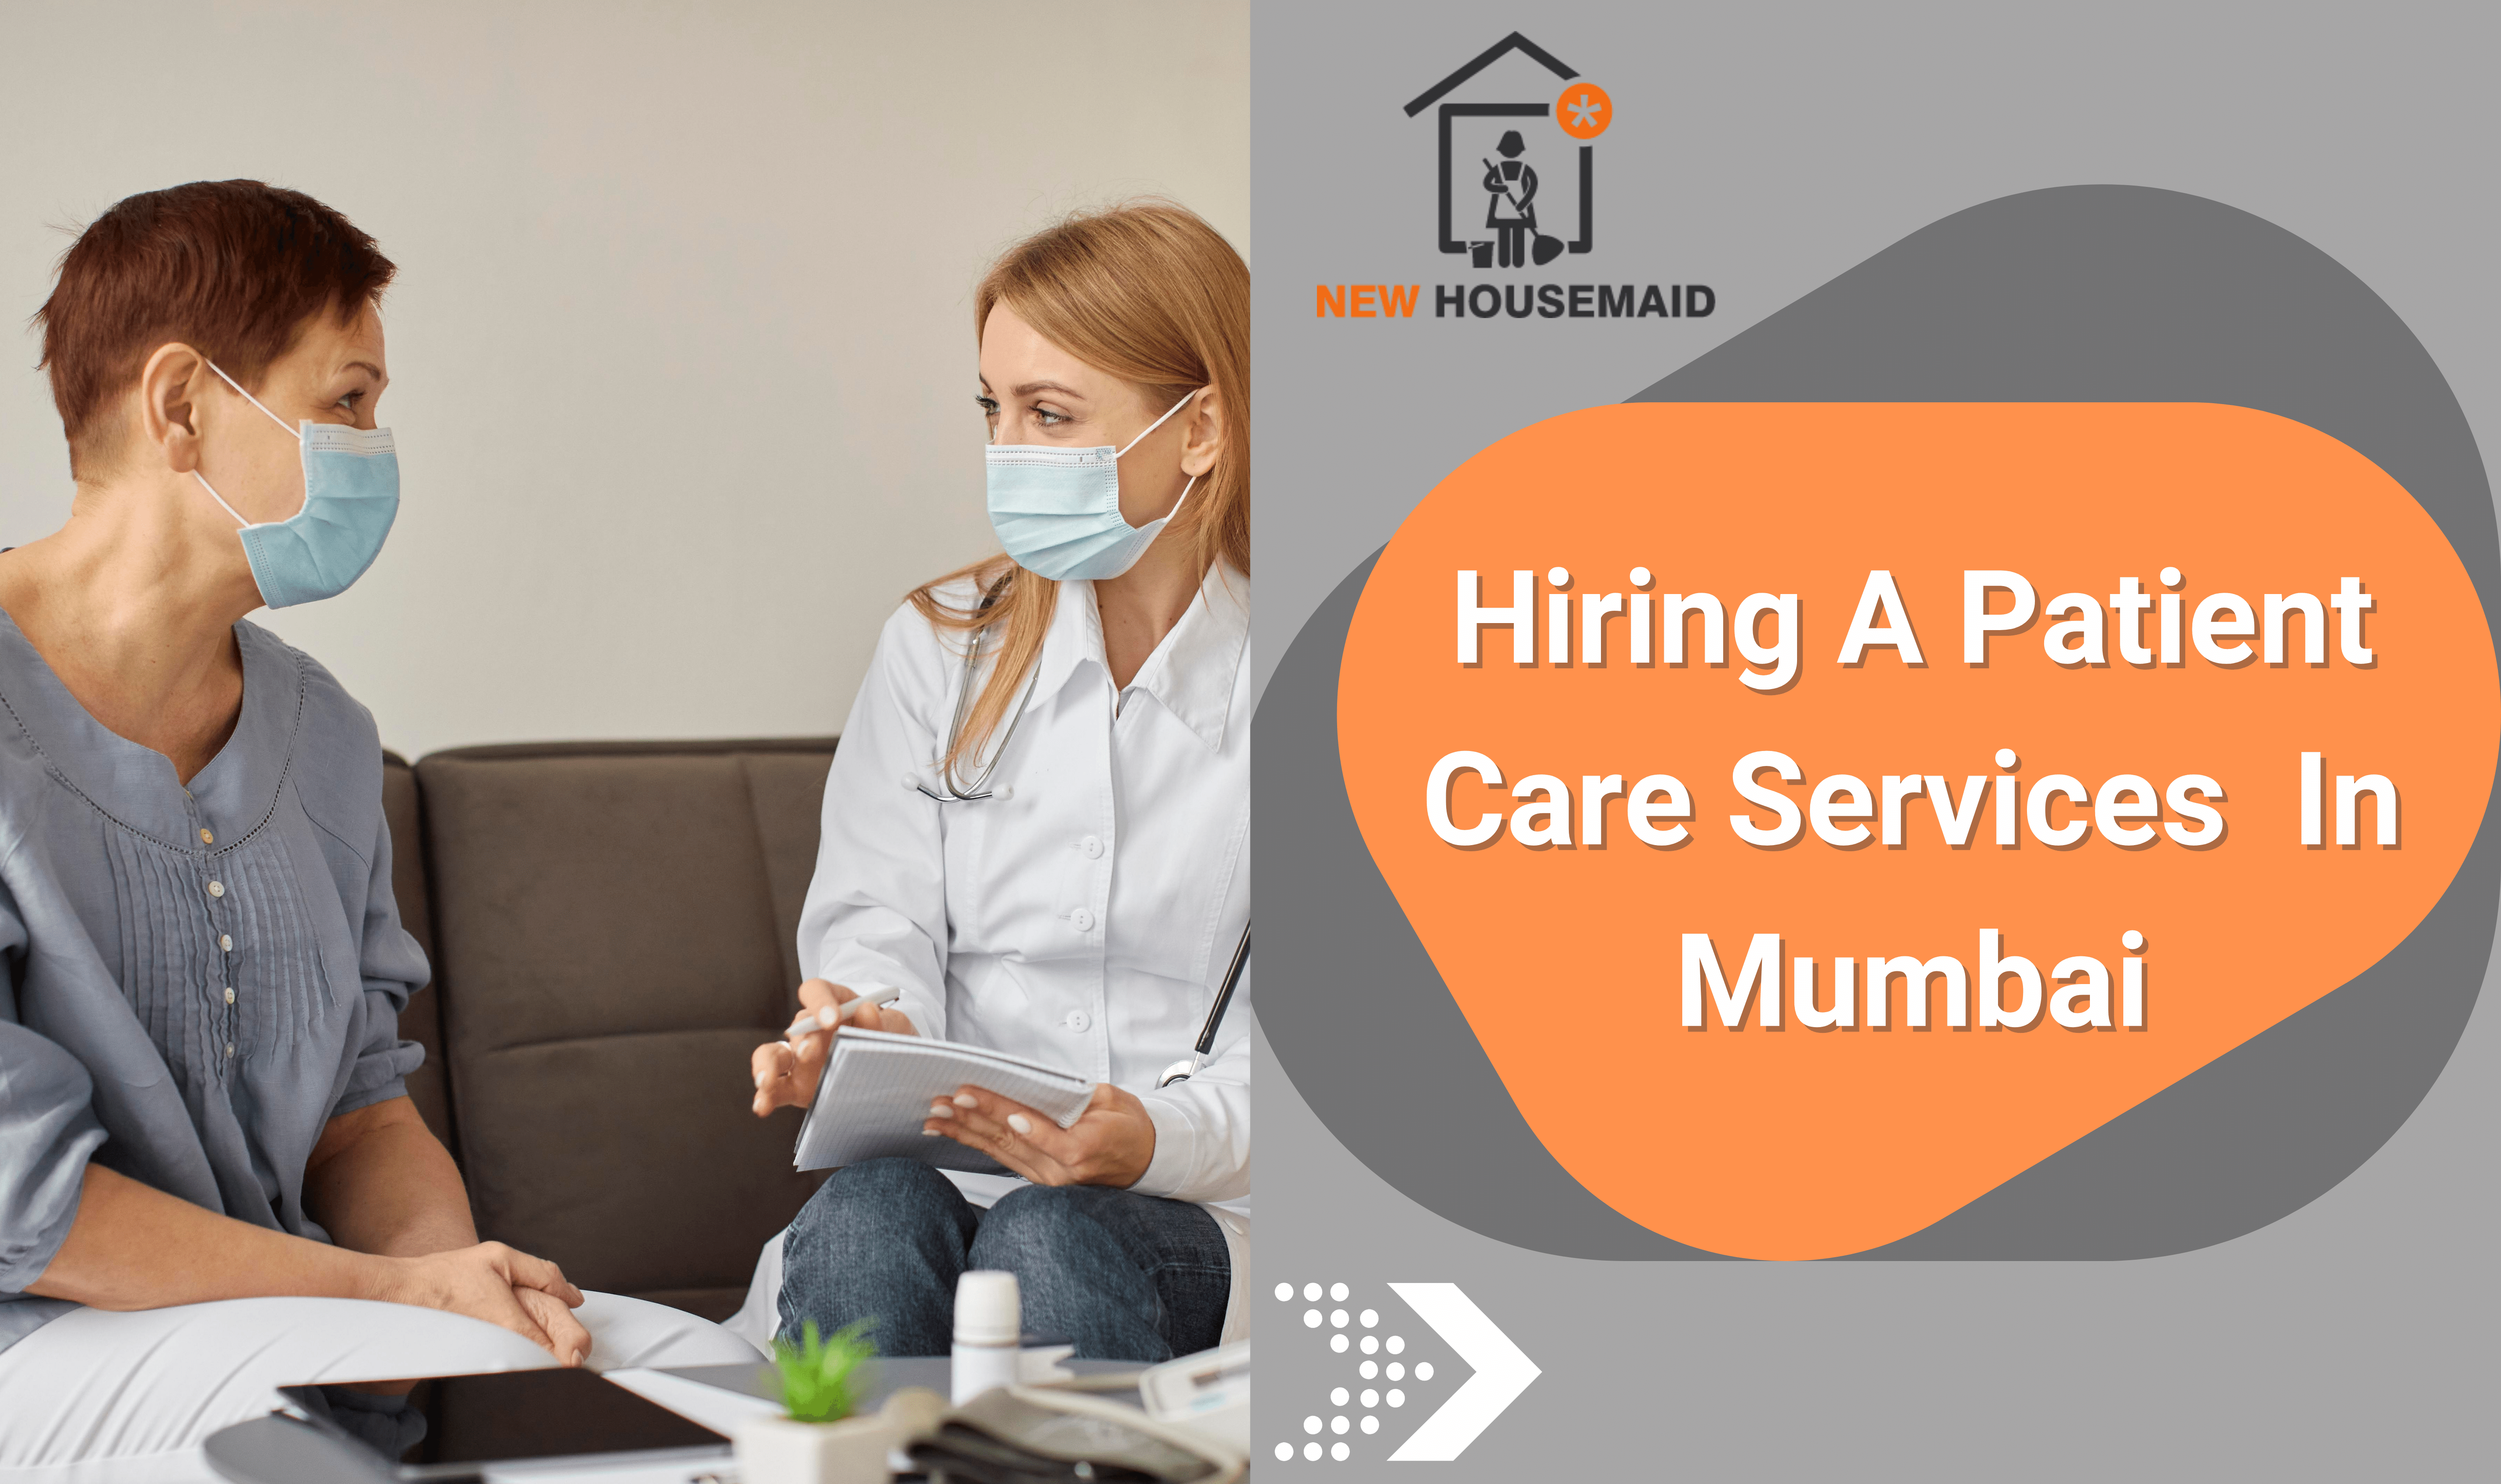 10 Important Questions to Ask When Hiring a Patient Care Service in Mumbai